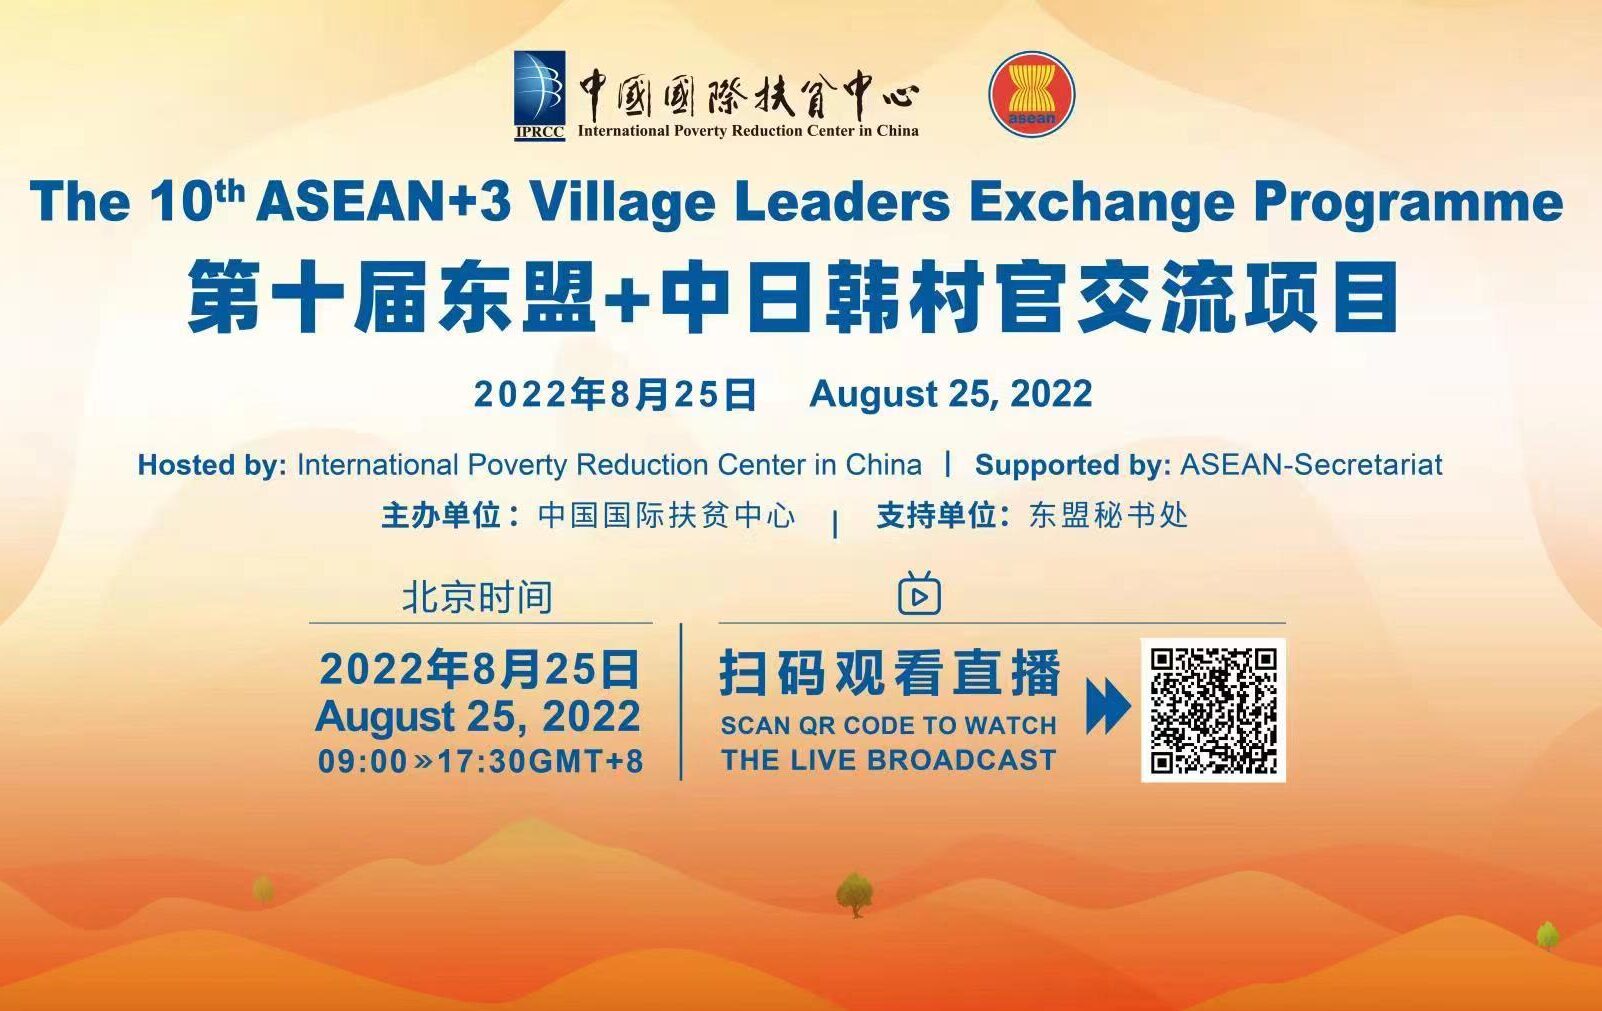 The 10<sup>th</sup> ASEAN+3 Village Leaders Exchange Programme